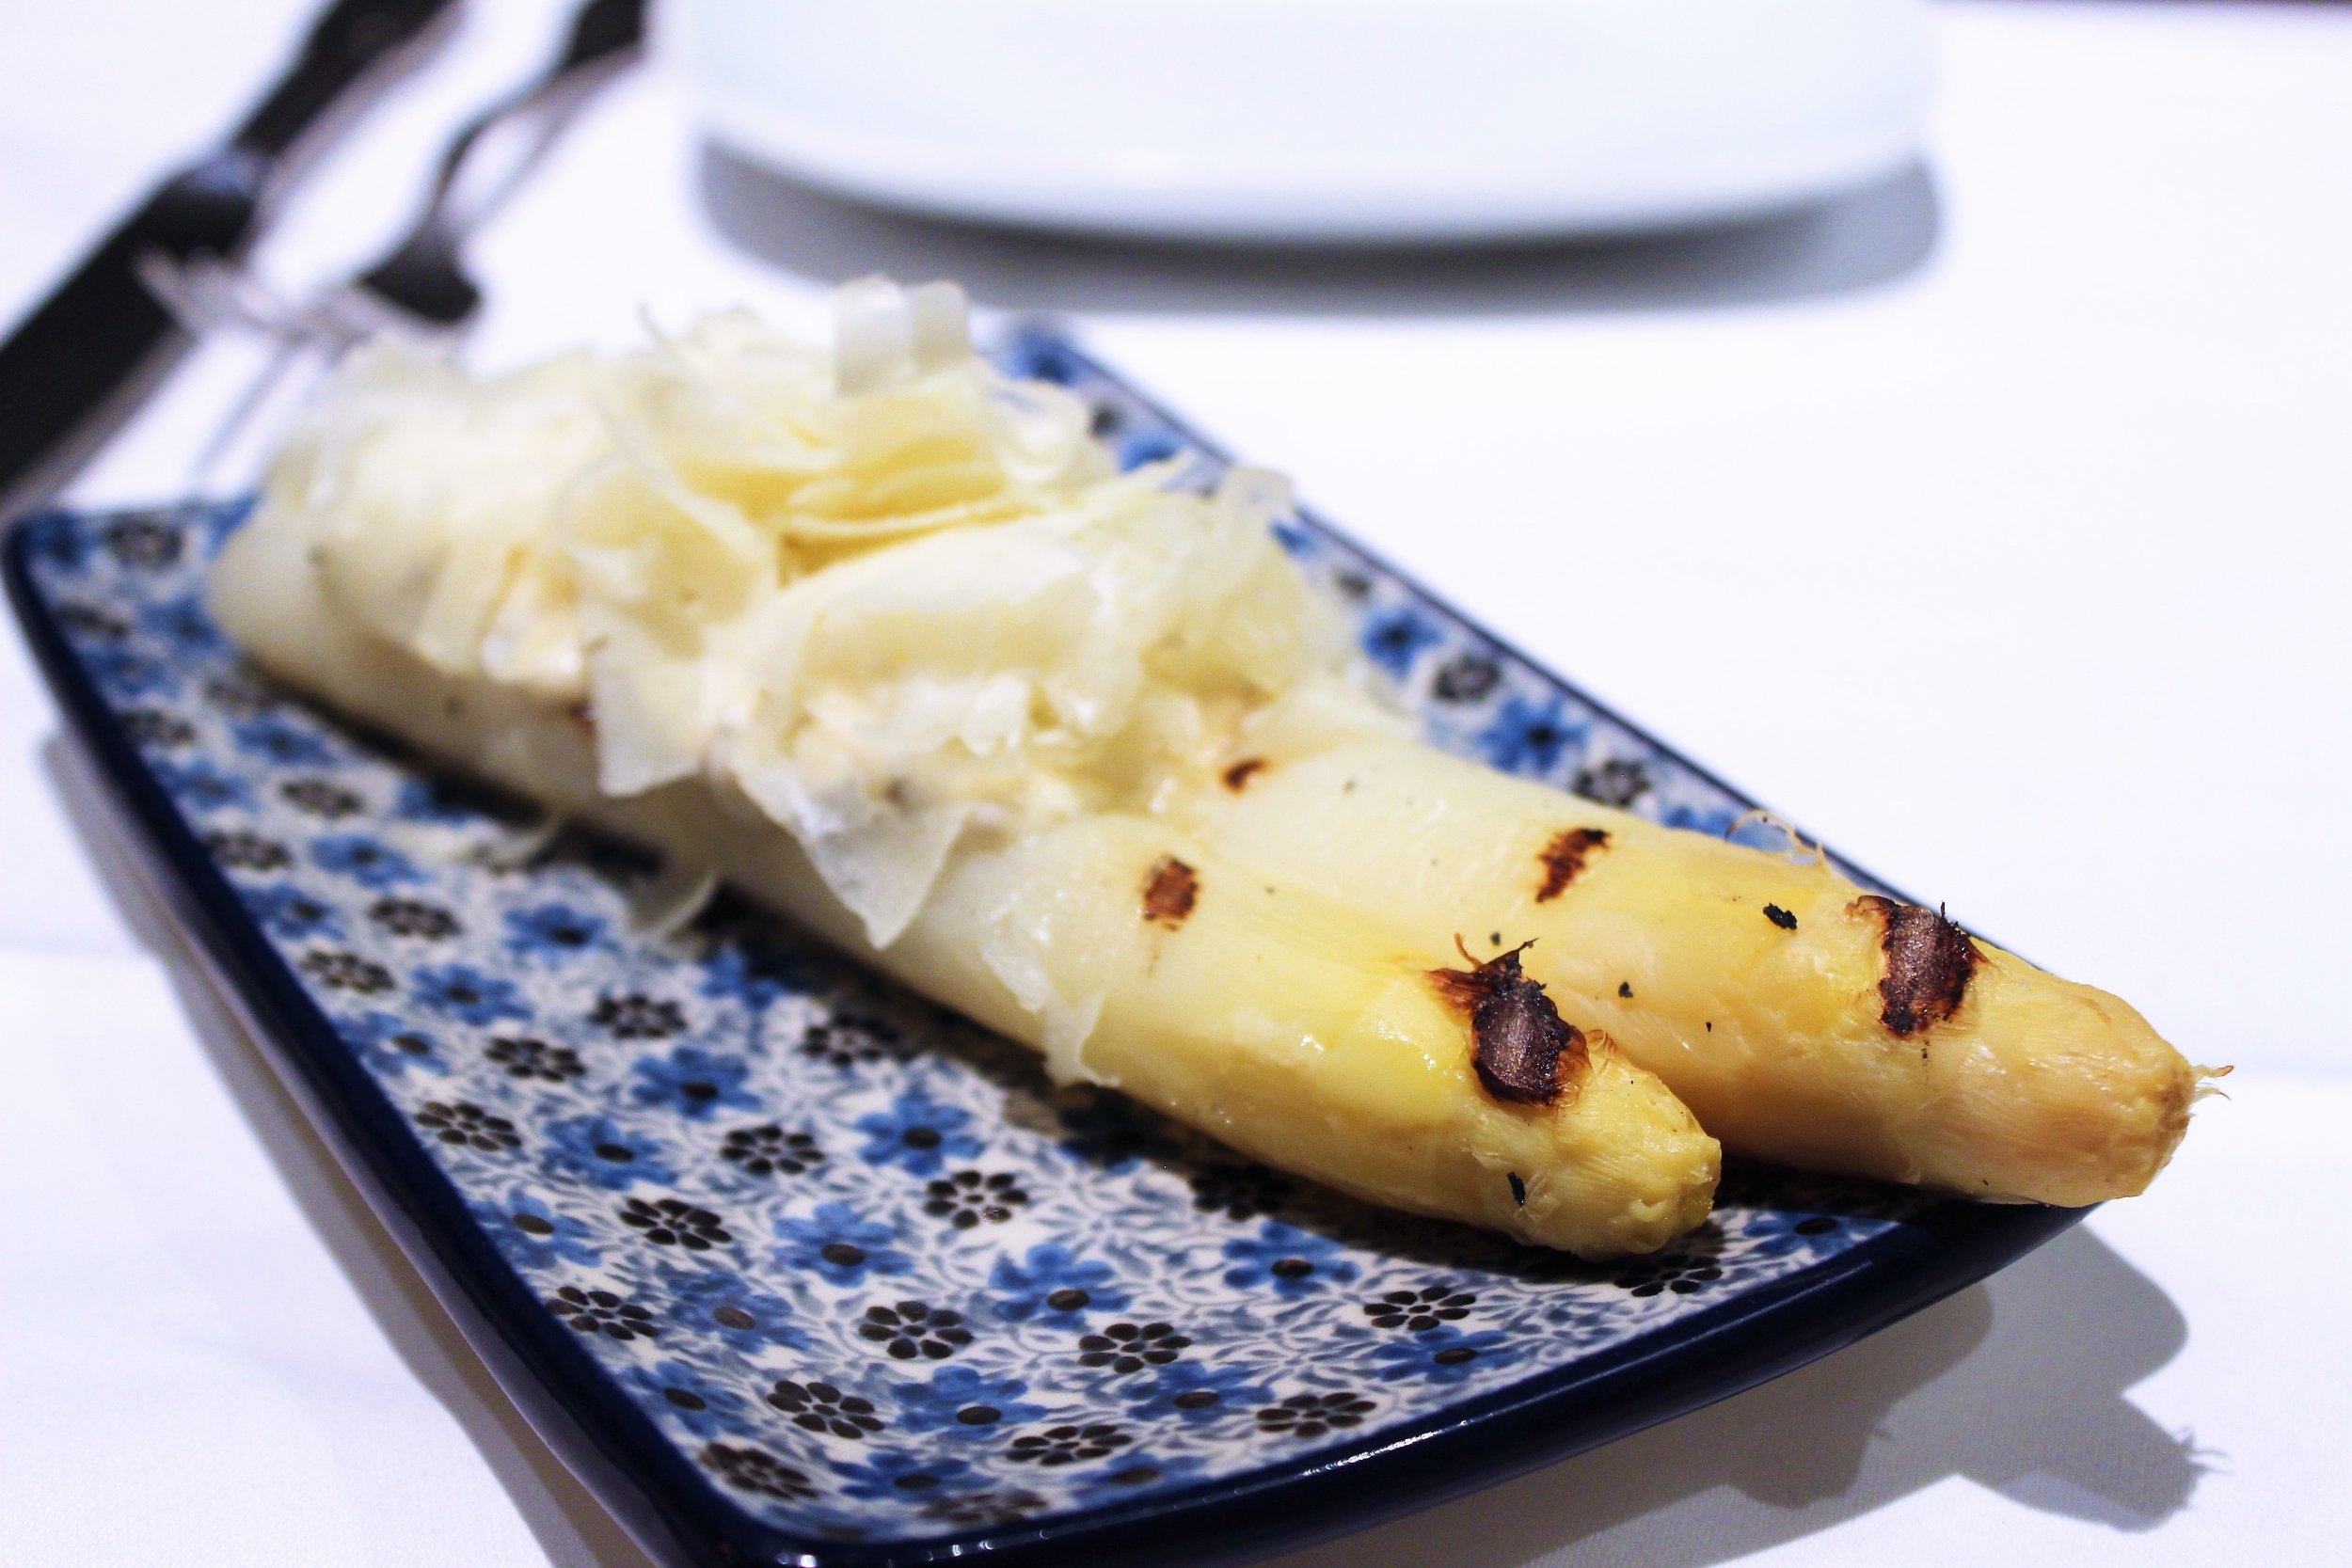 Grilled White Asparagus Truffled Mayonnaise and Idiazábal cheese at Igueldo in Barcelona